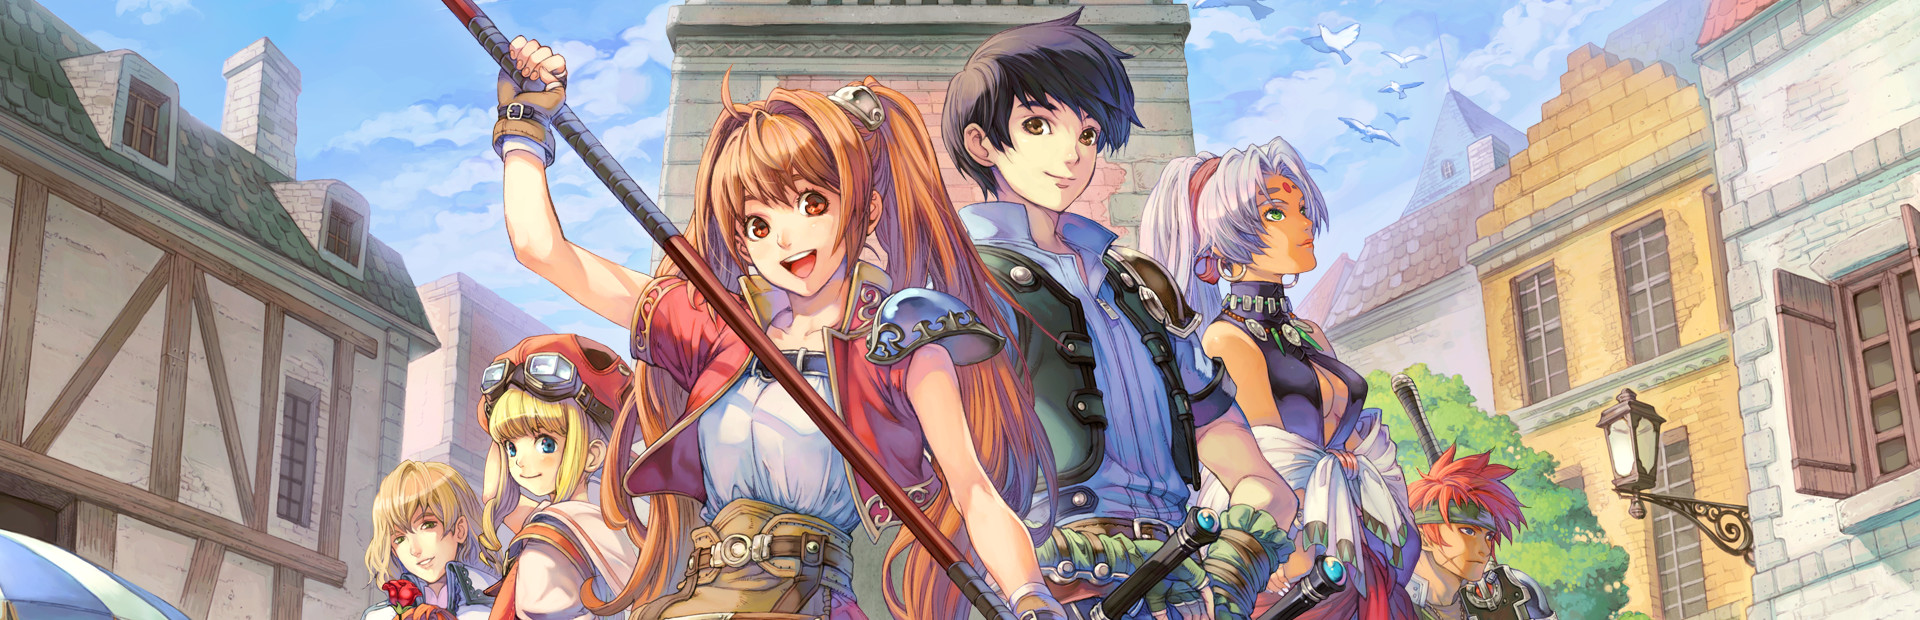 The Legend of Heroes: Trails in the Sky cover image